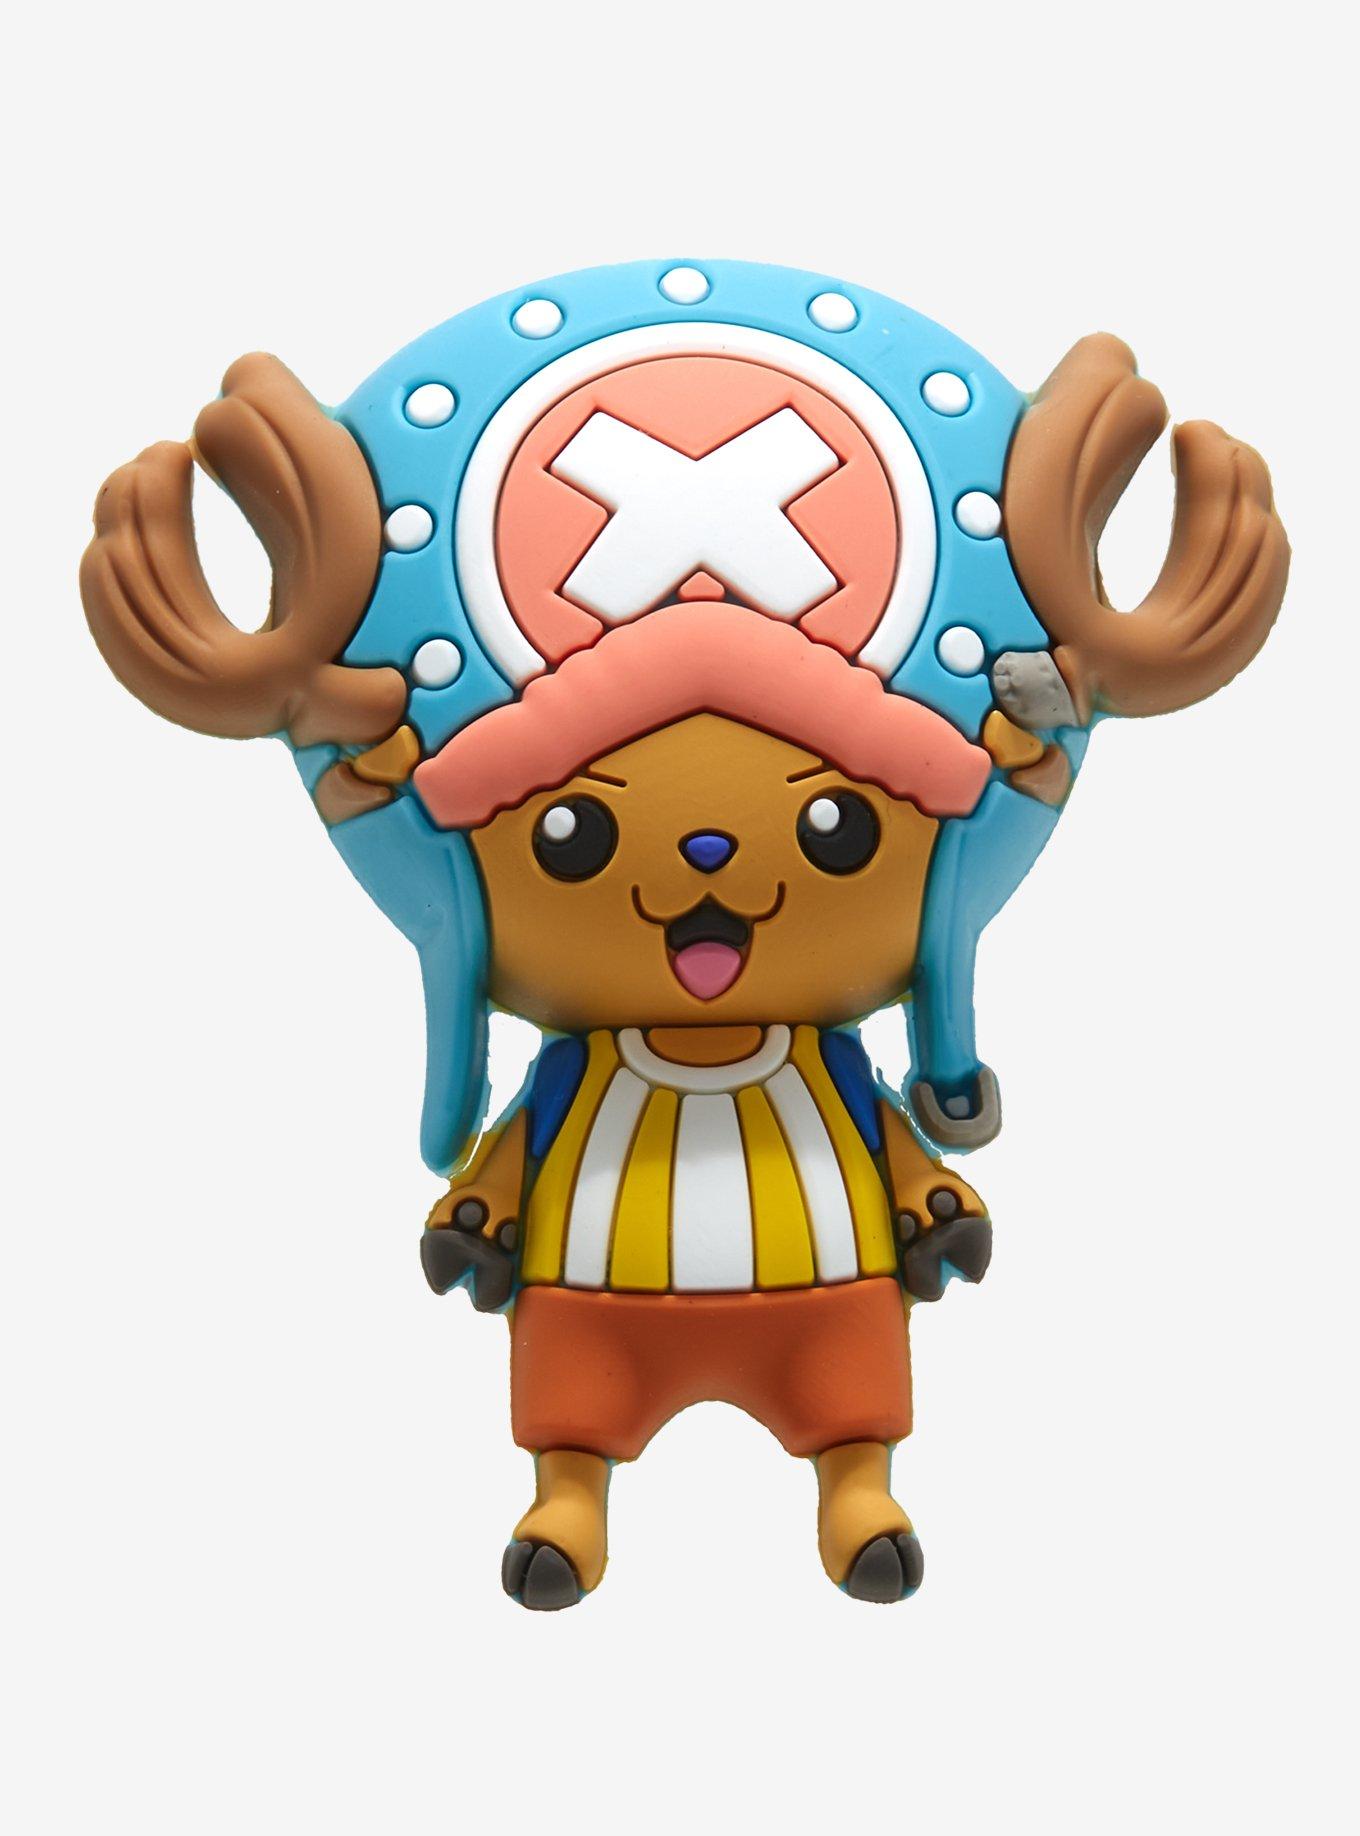 Chopper Gets His Own One Piece Platformer with One Piece Run